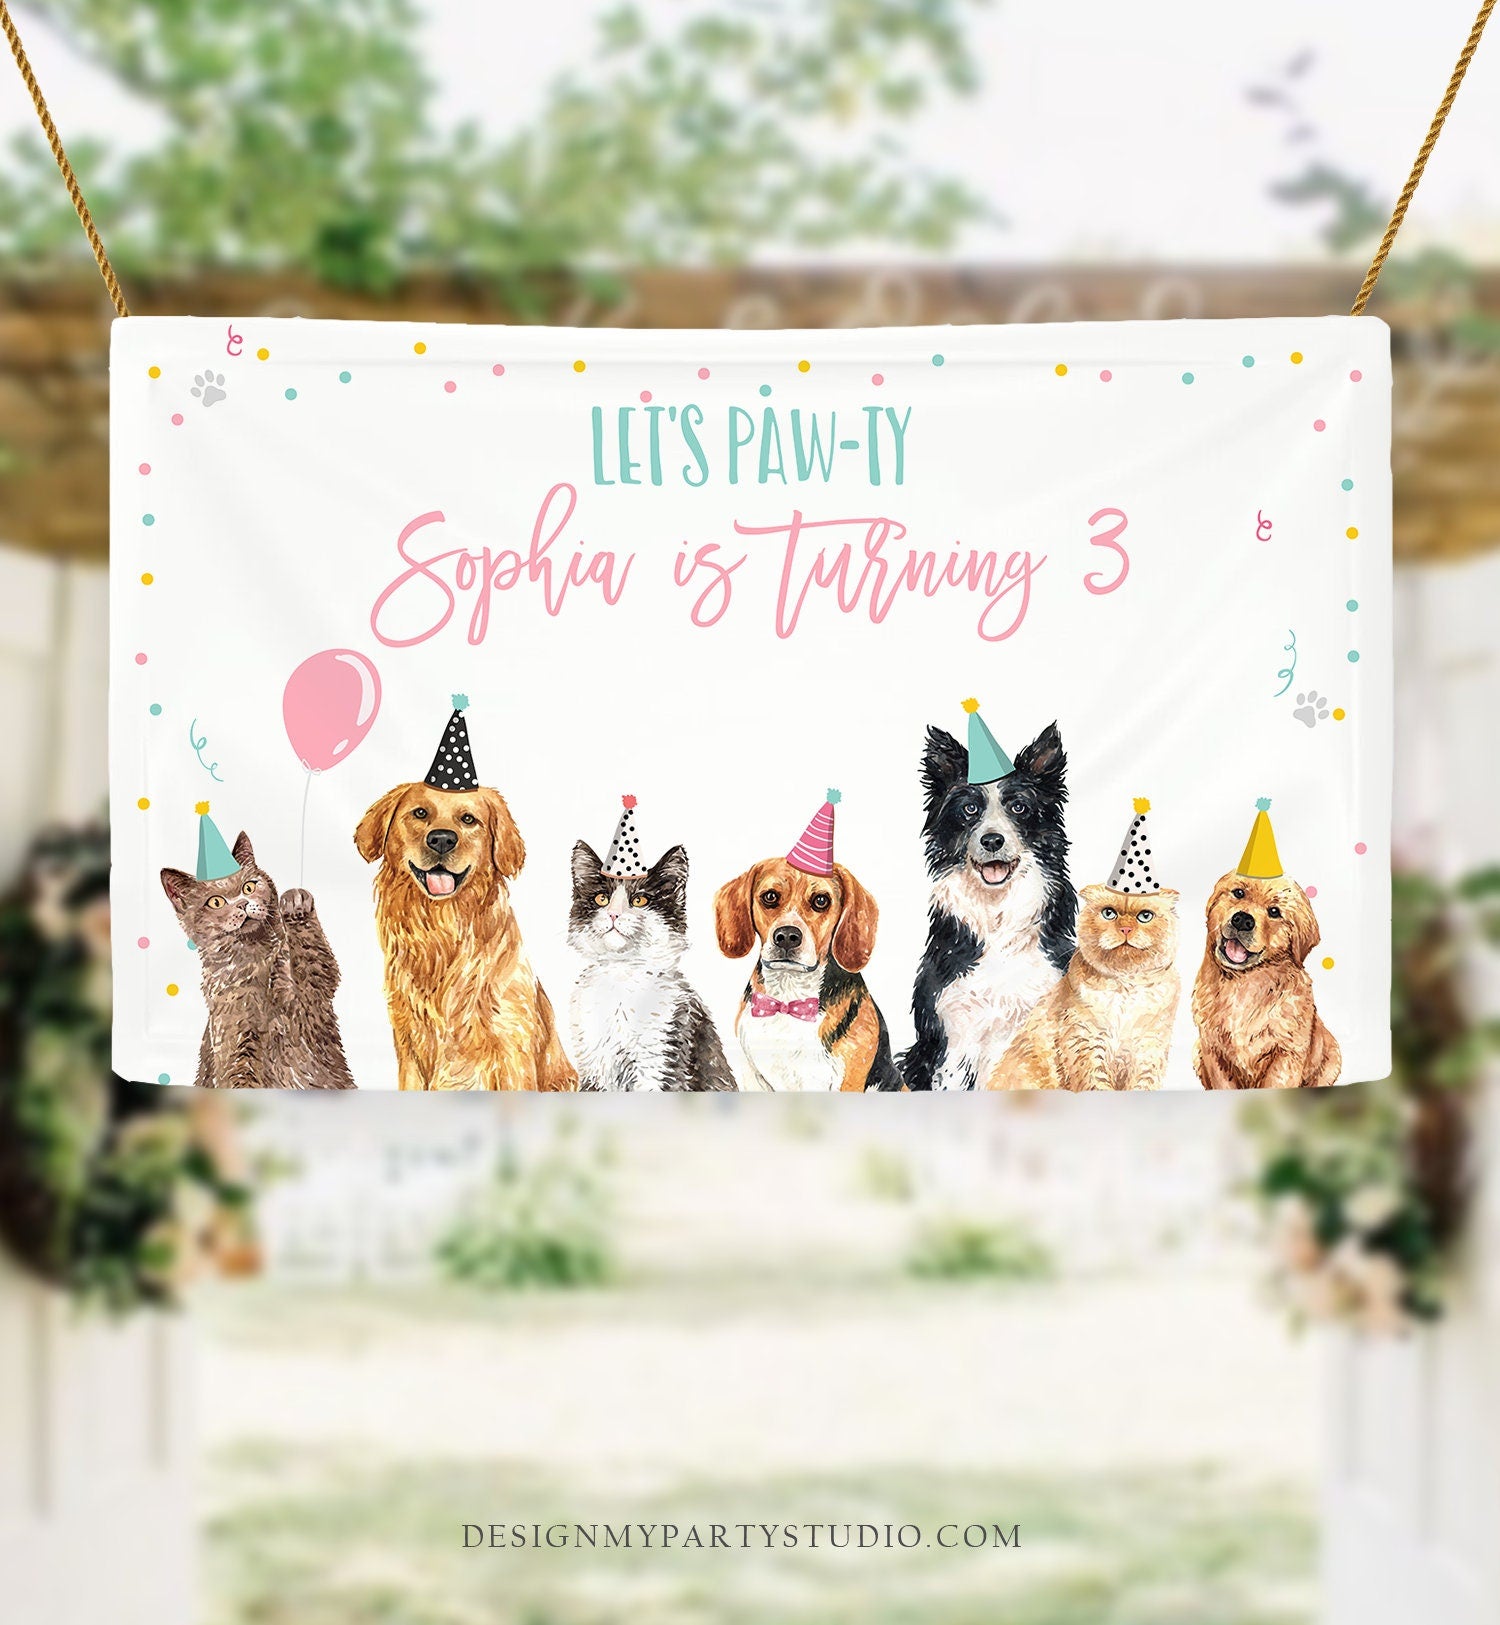 Editable Cats and Dogs Backdrop Banner Puppy Birthday Cat Birthday Decor Pet Pawty Doggy Dog PartyDownload Corjl Template Printable 0384